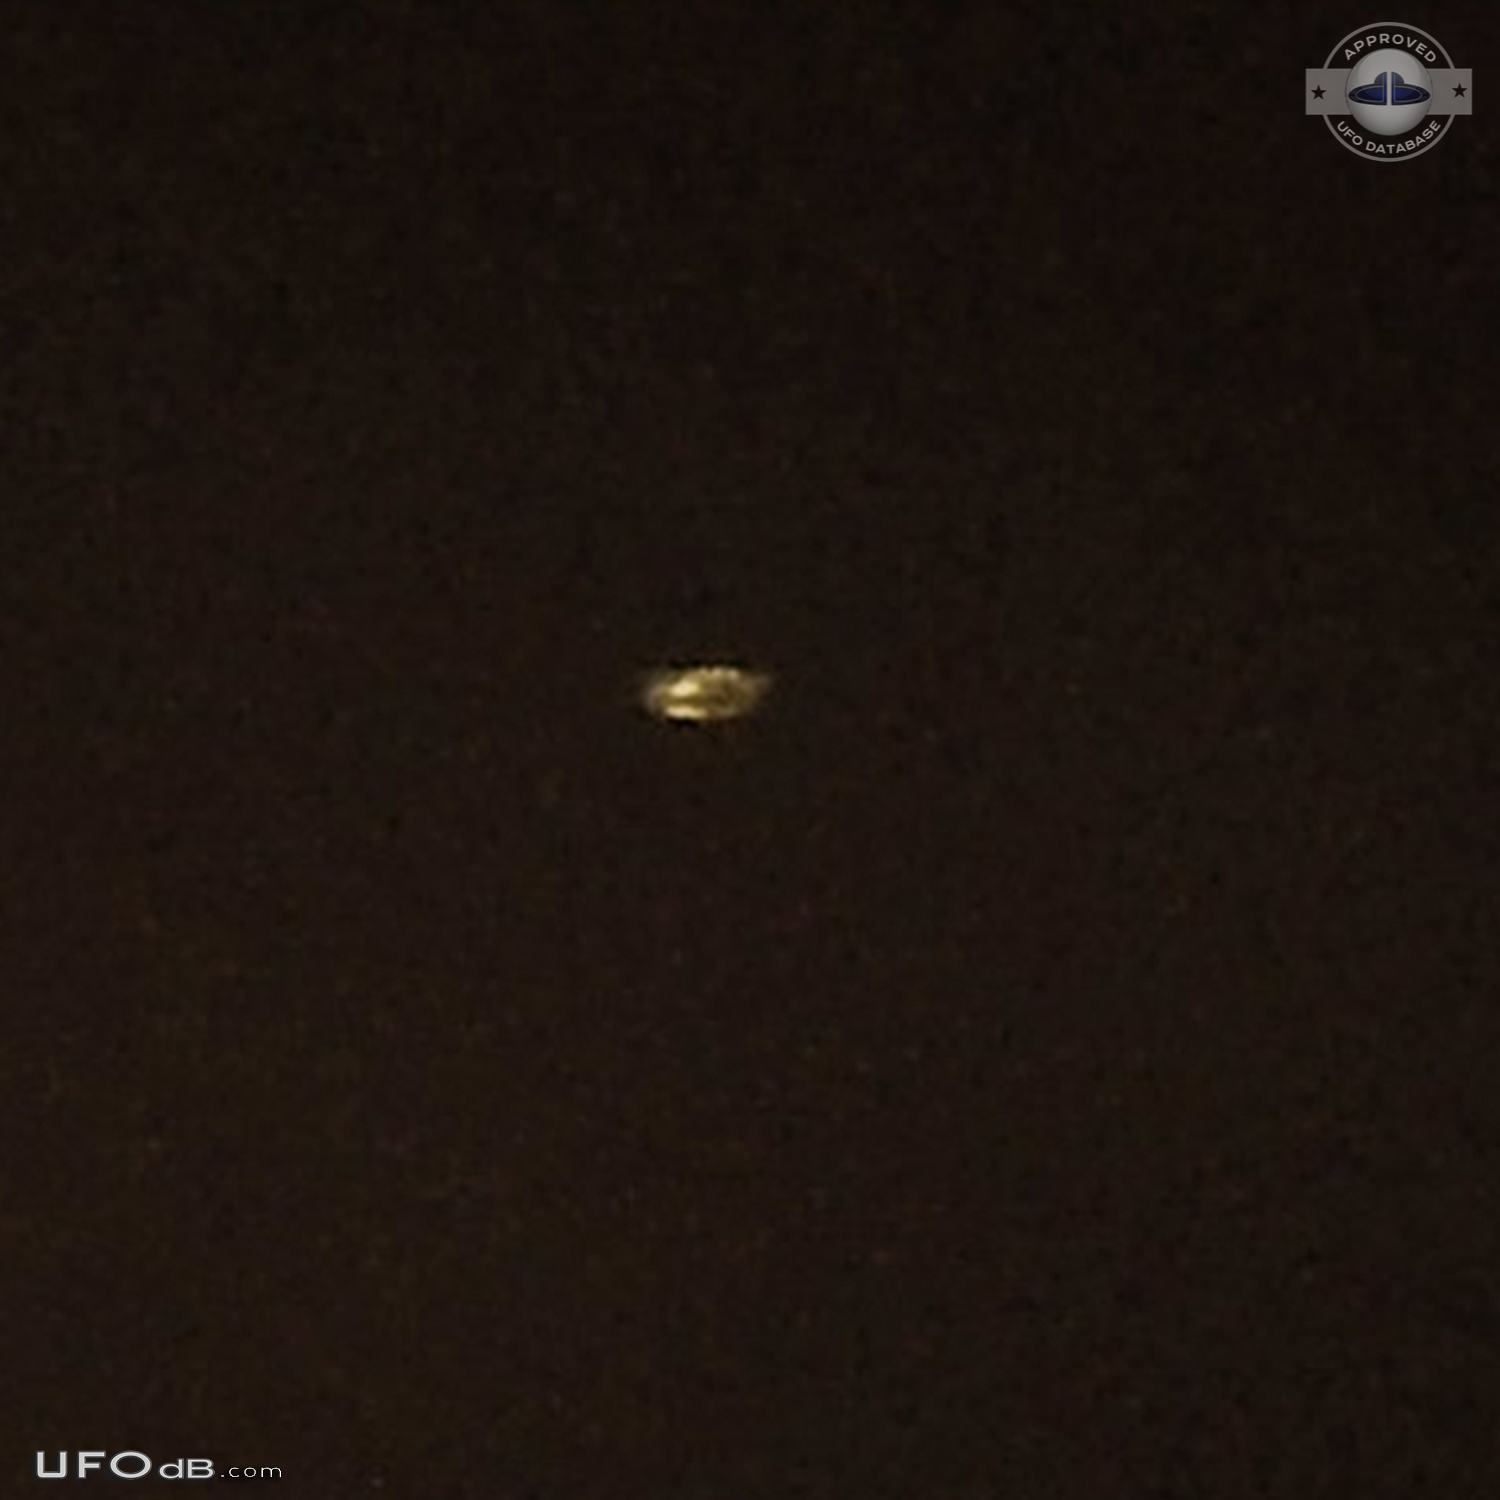 Distance UFO sighting, Appears to be circular shape - Tennessee 2014 UFO Picture #700-2